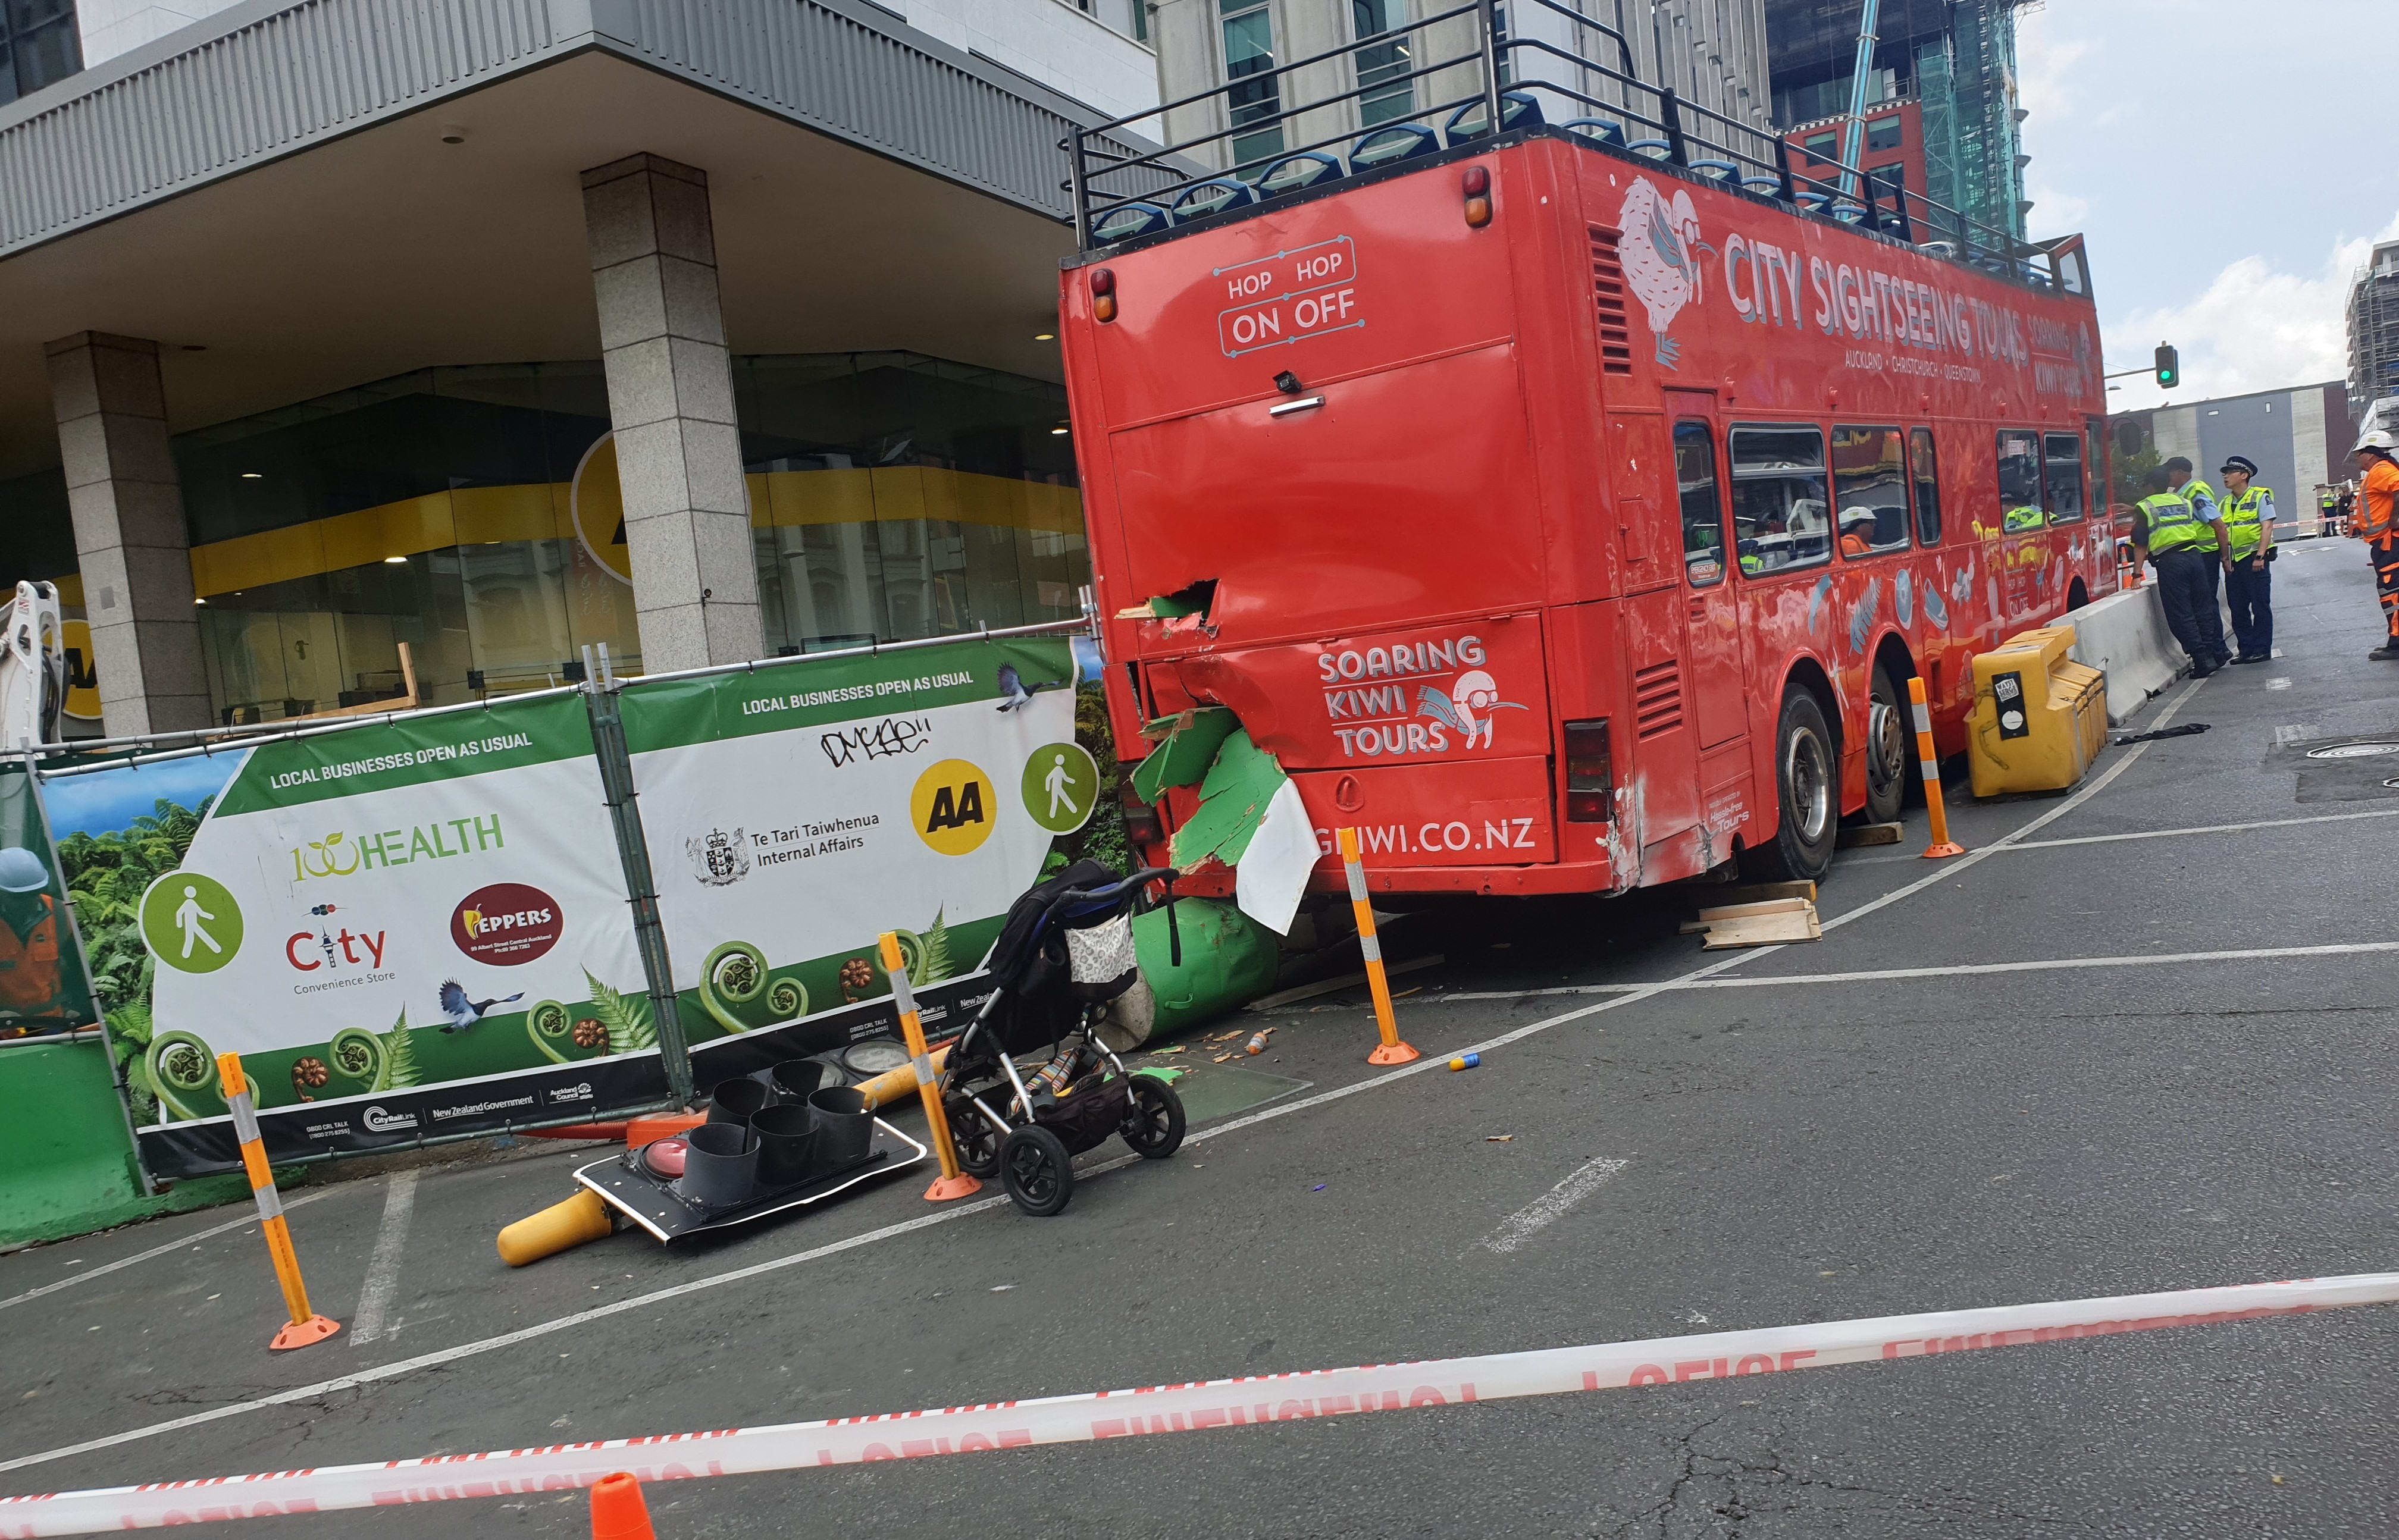 The aftermath of the bus crash on Victoria Street on Monday.